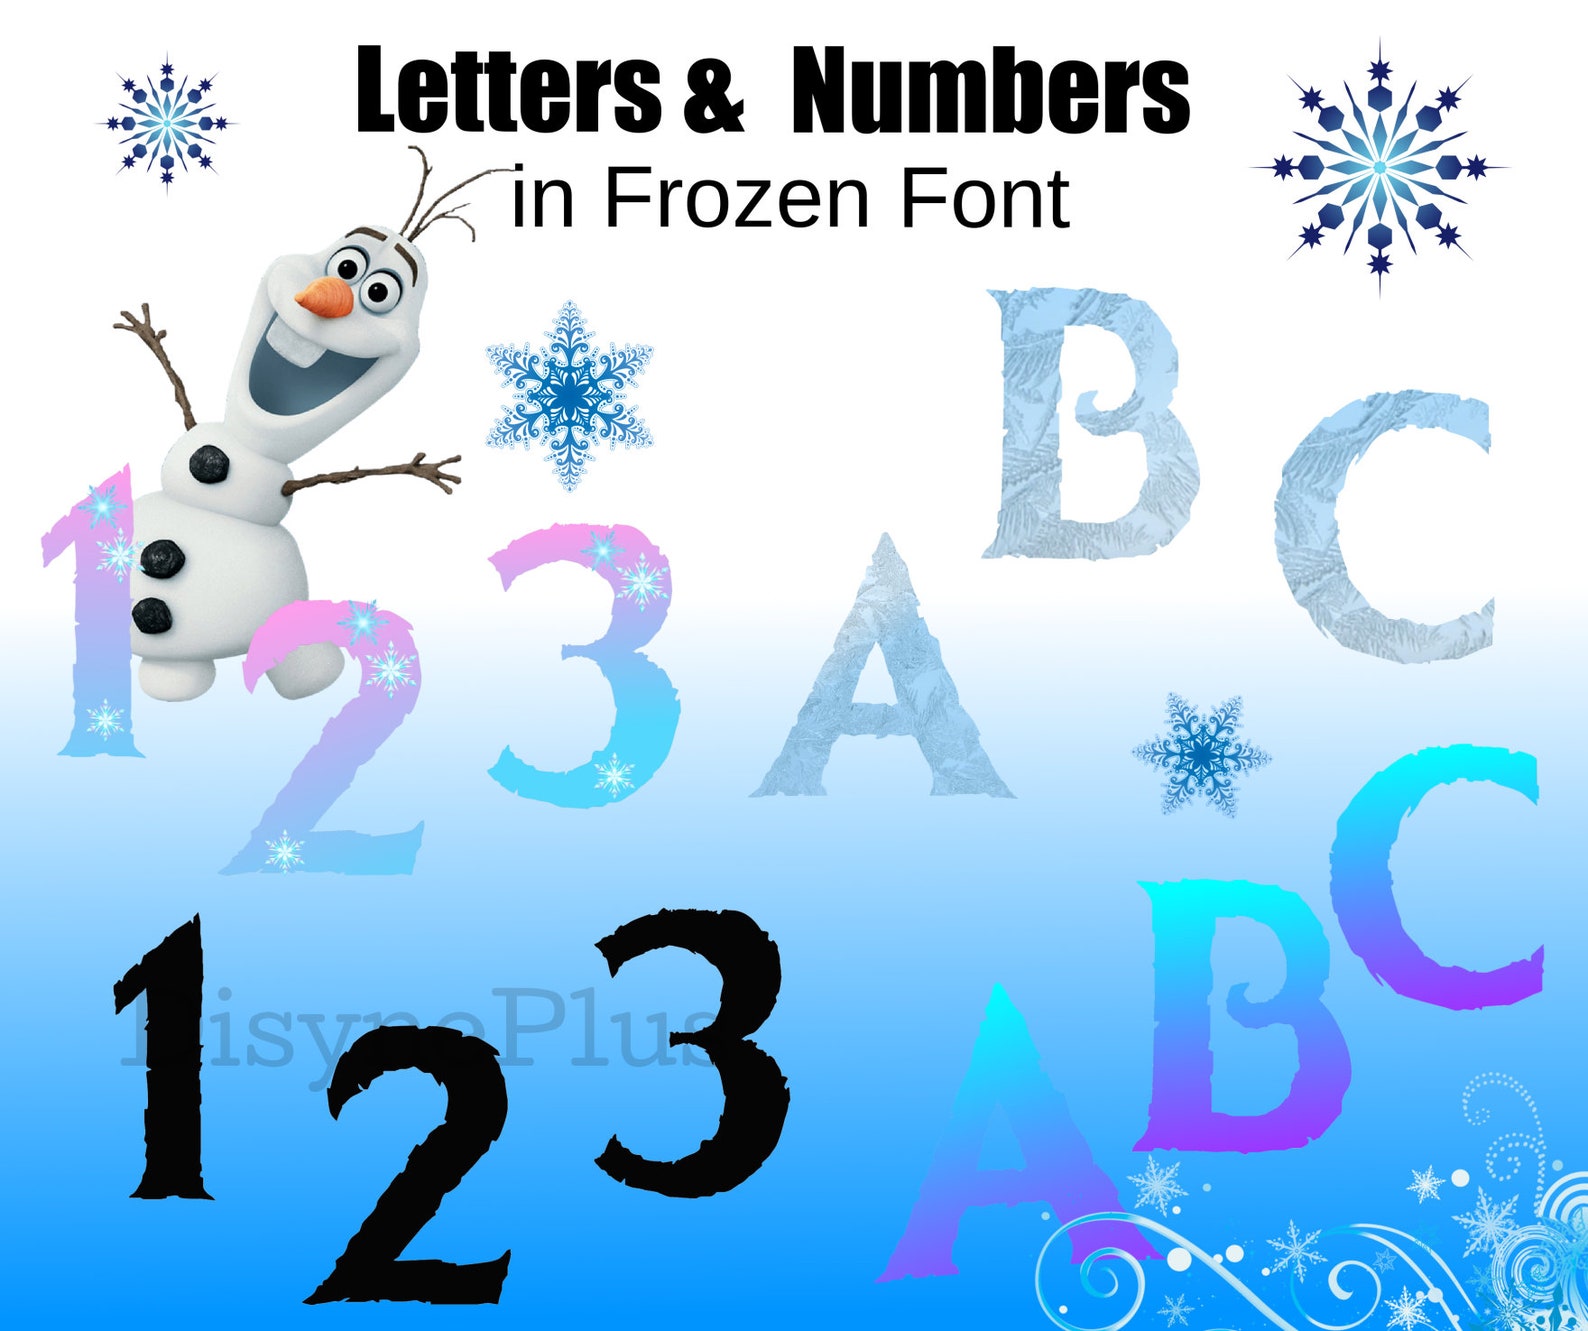 Letters and numbers in frozen font.